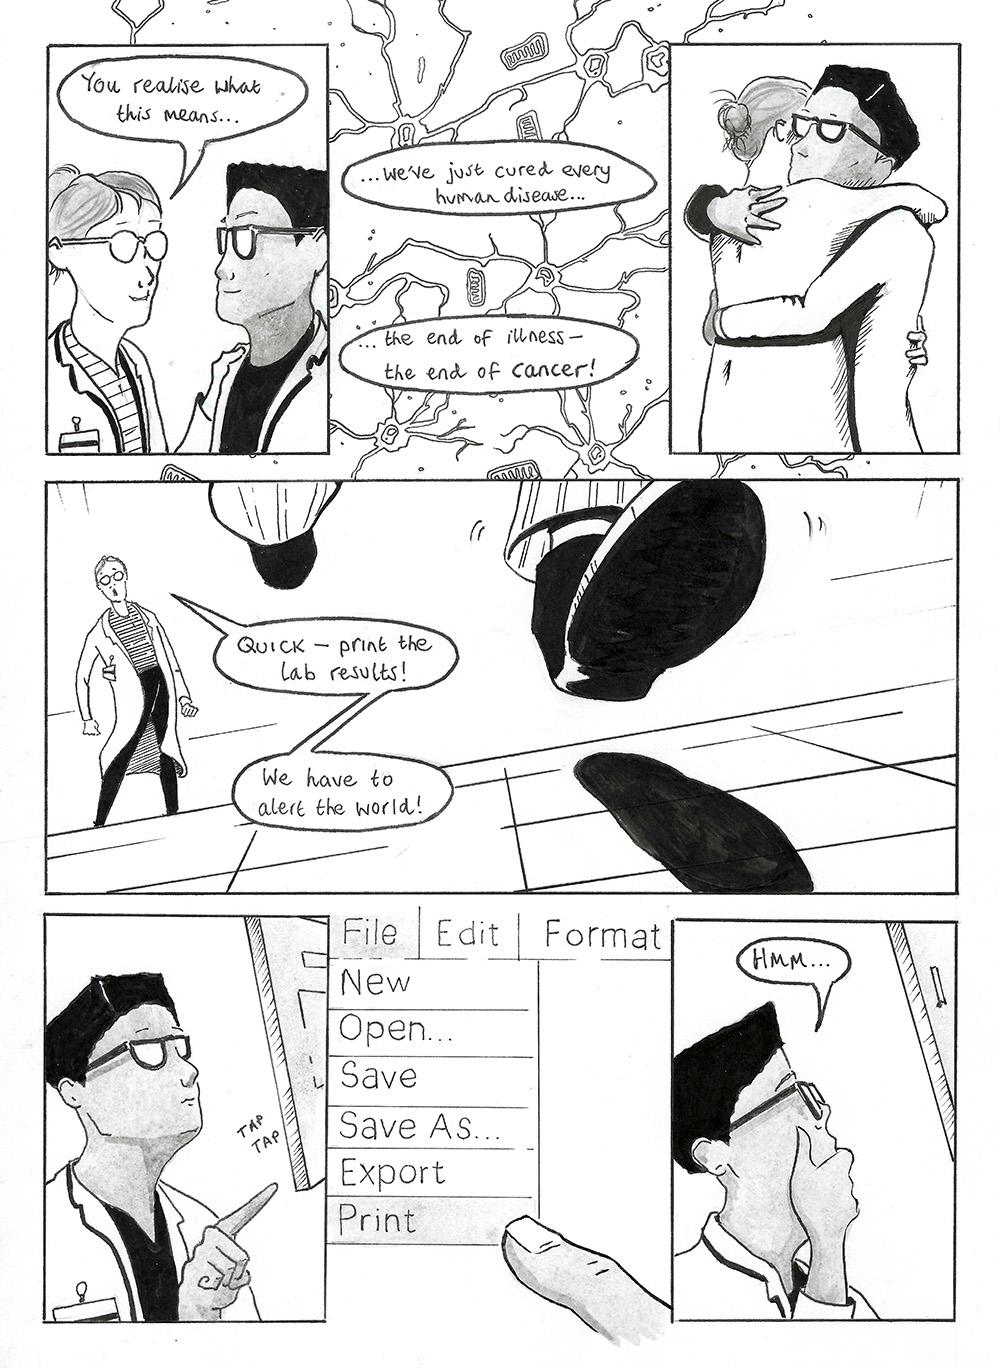 Page 2 of Connection Error, a black and white comic by Adam Westbrook